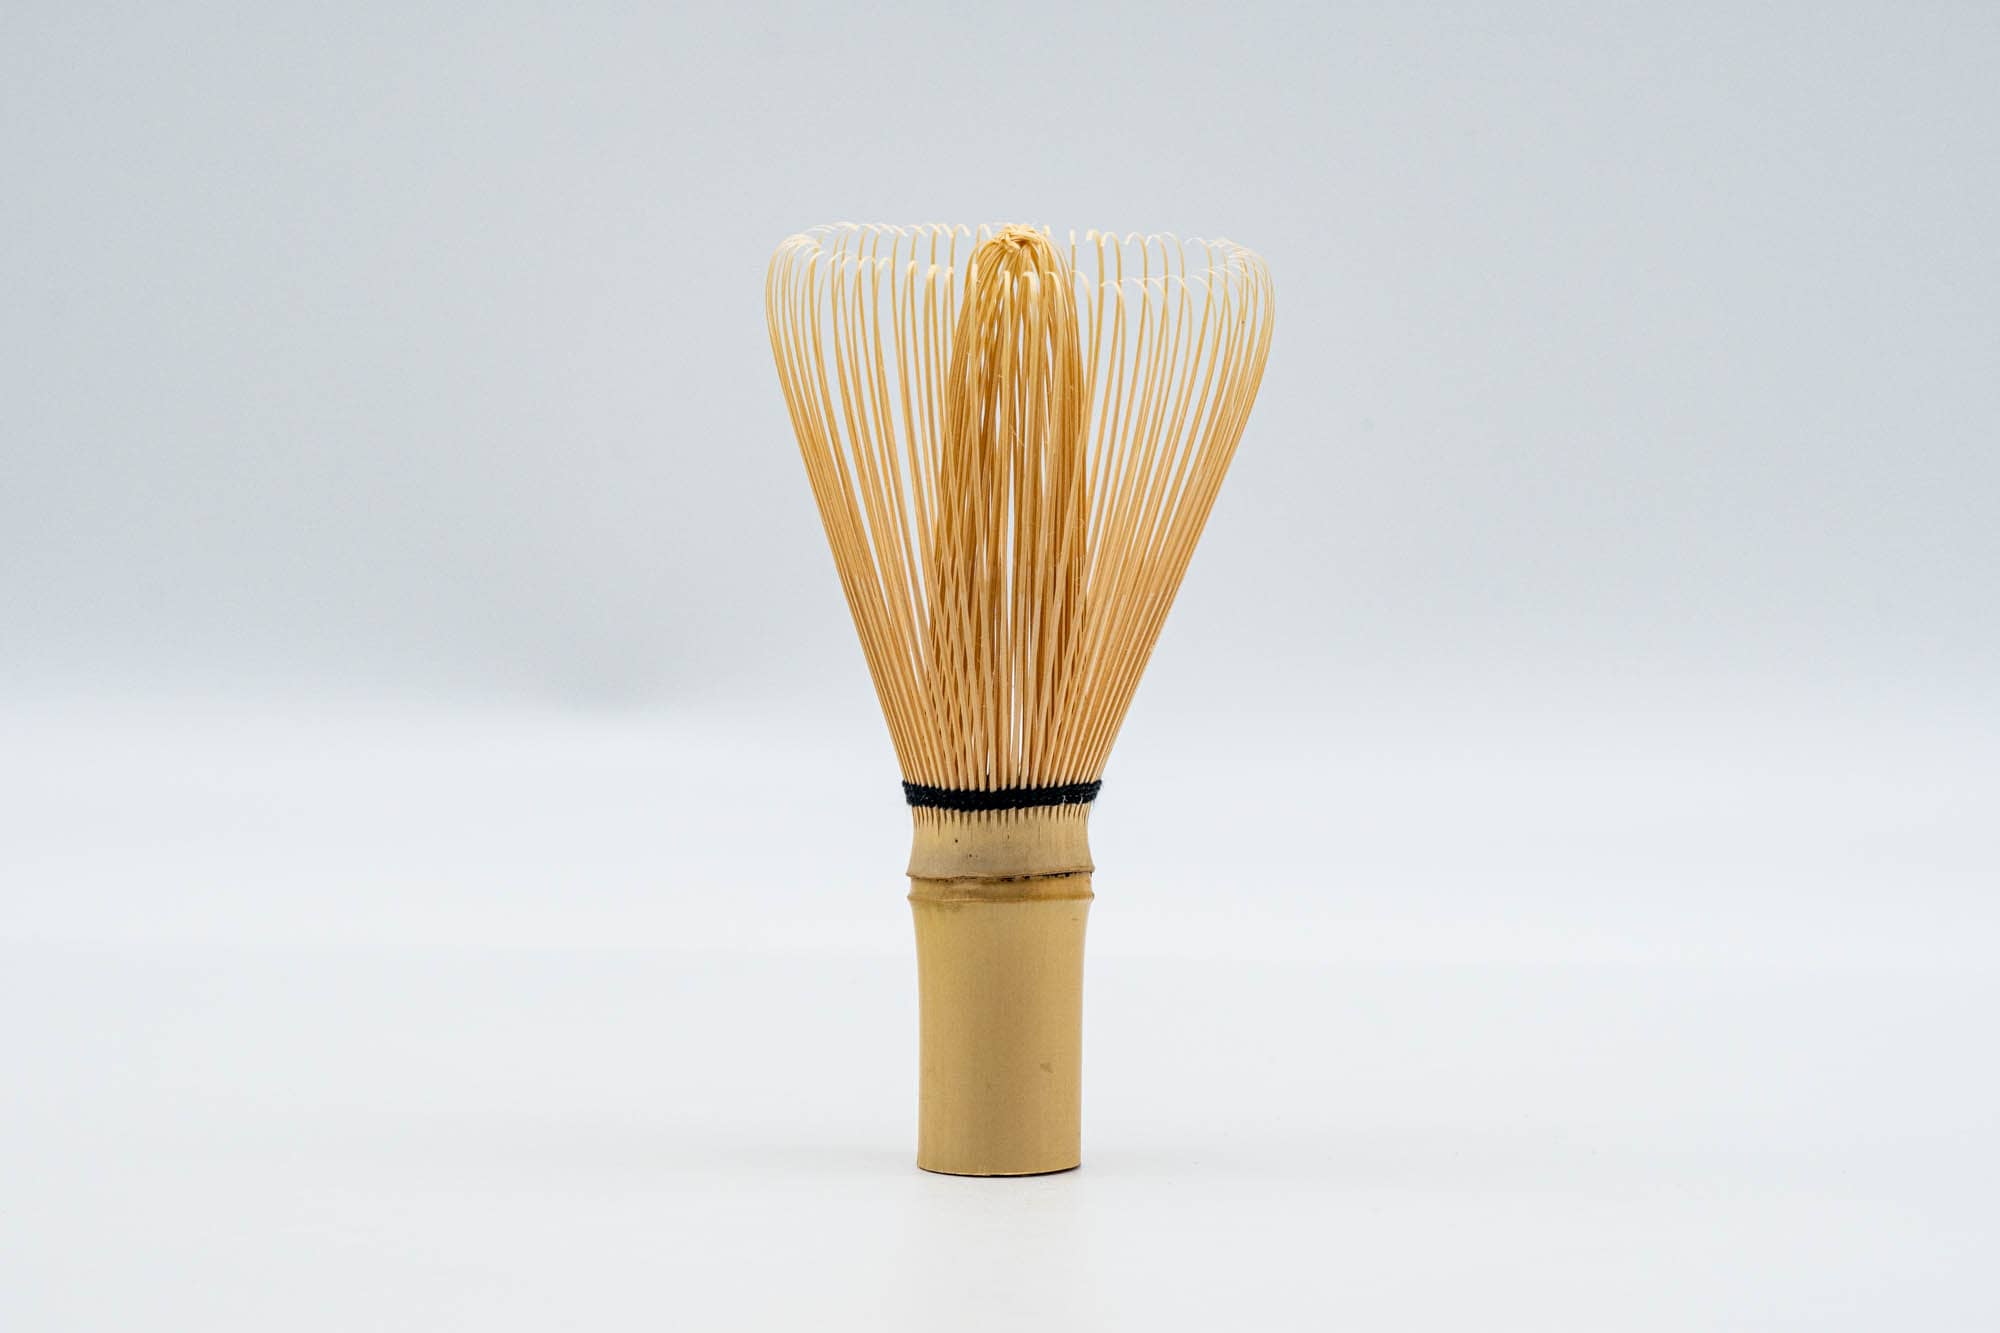 How to Make Otemae - Coffee with Japanese Bamboo Whisk (Chasen) – Japanese  Coffee Co.